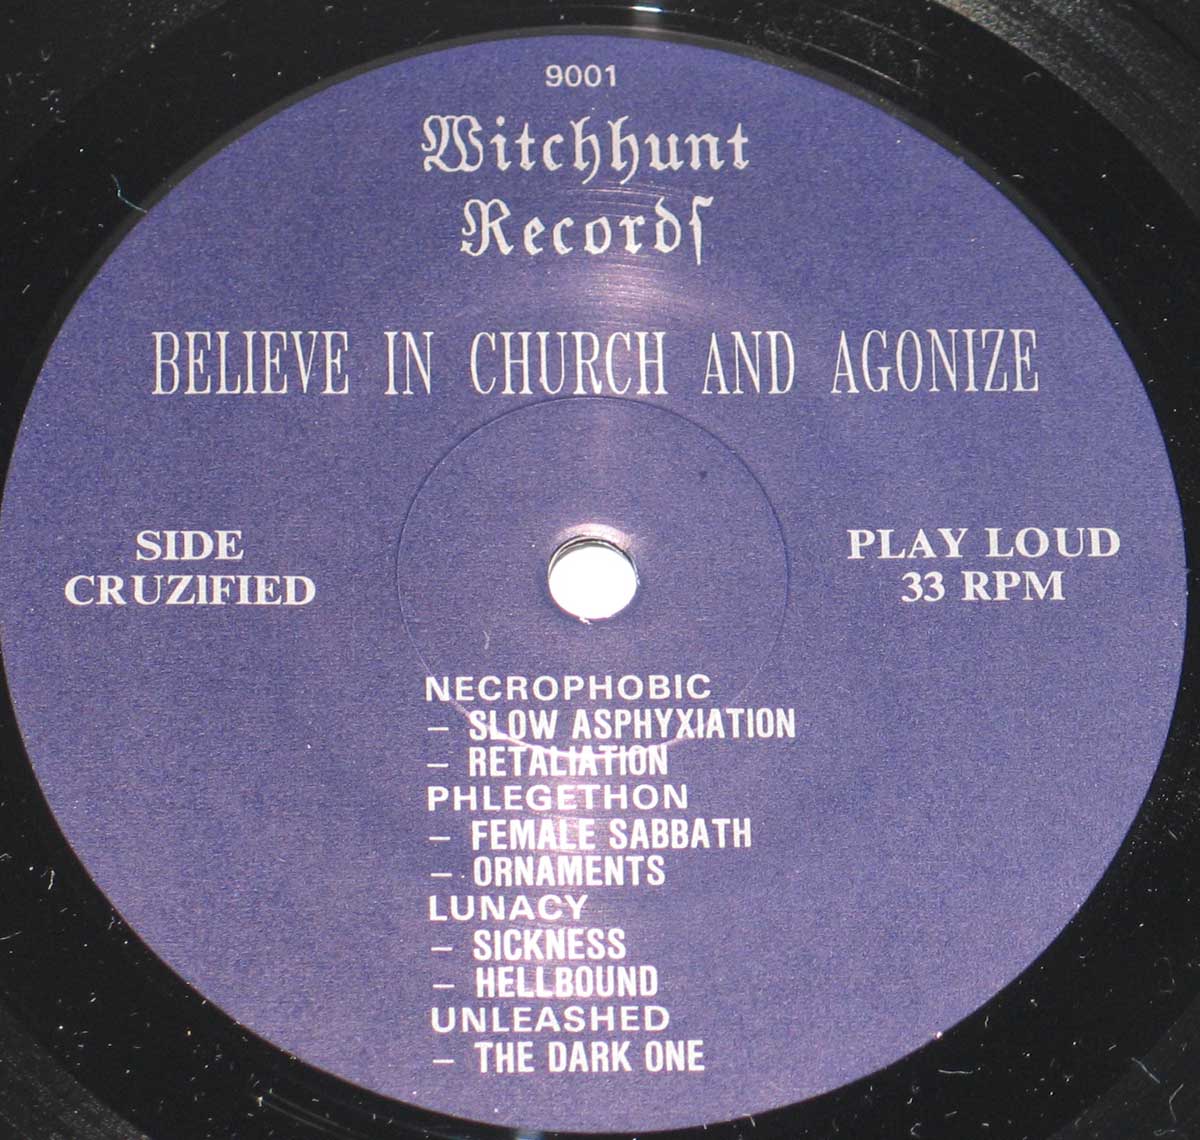 Close-up pf the Blue Witchhunt record label with catalognr 9001  